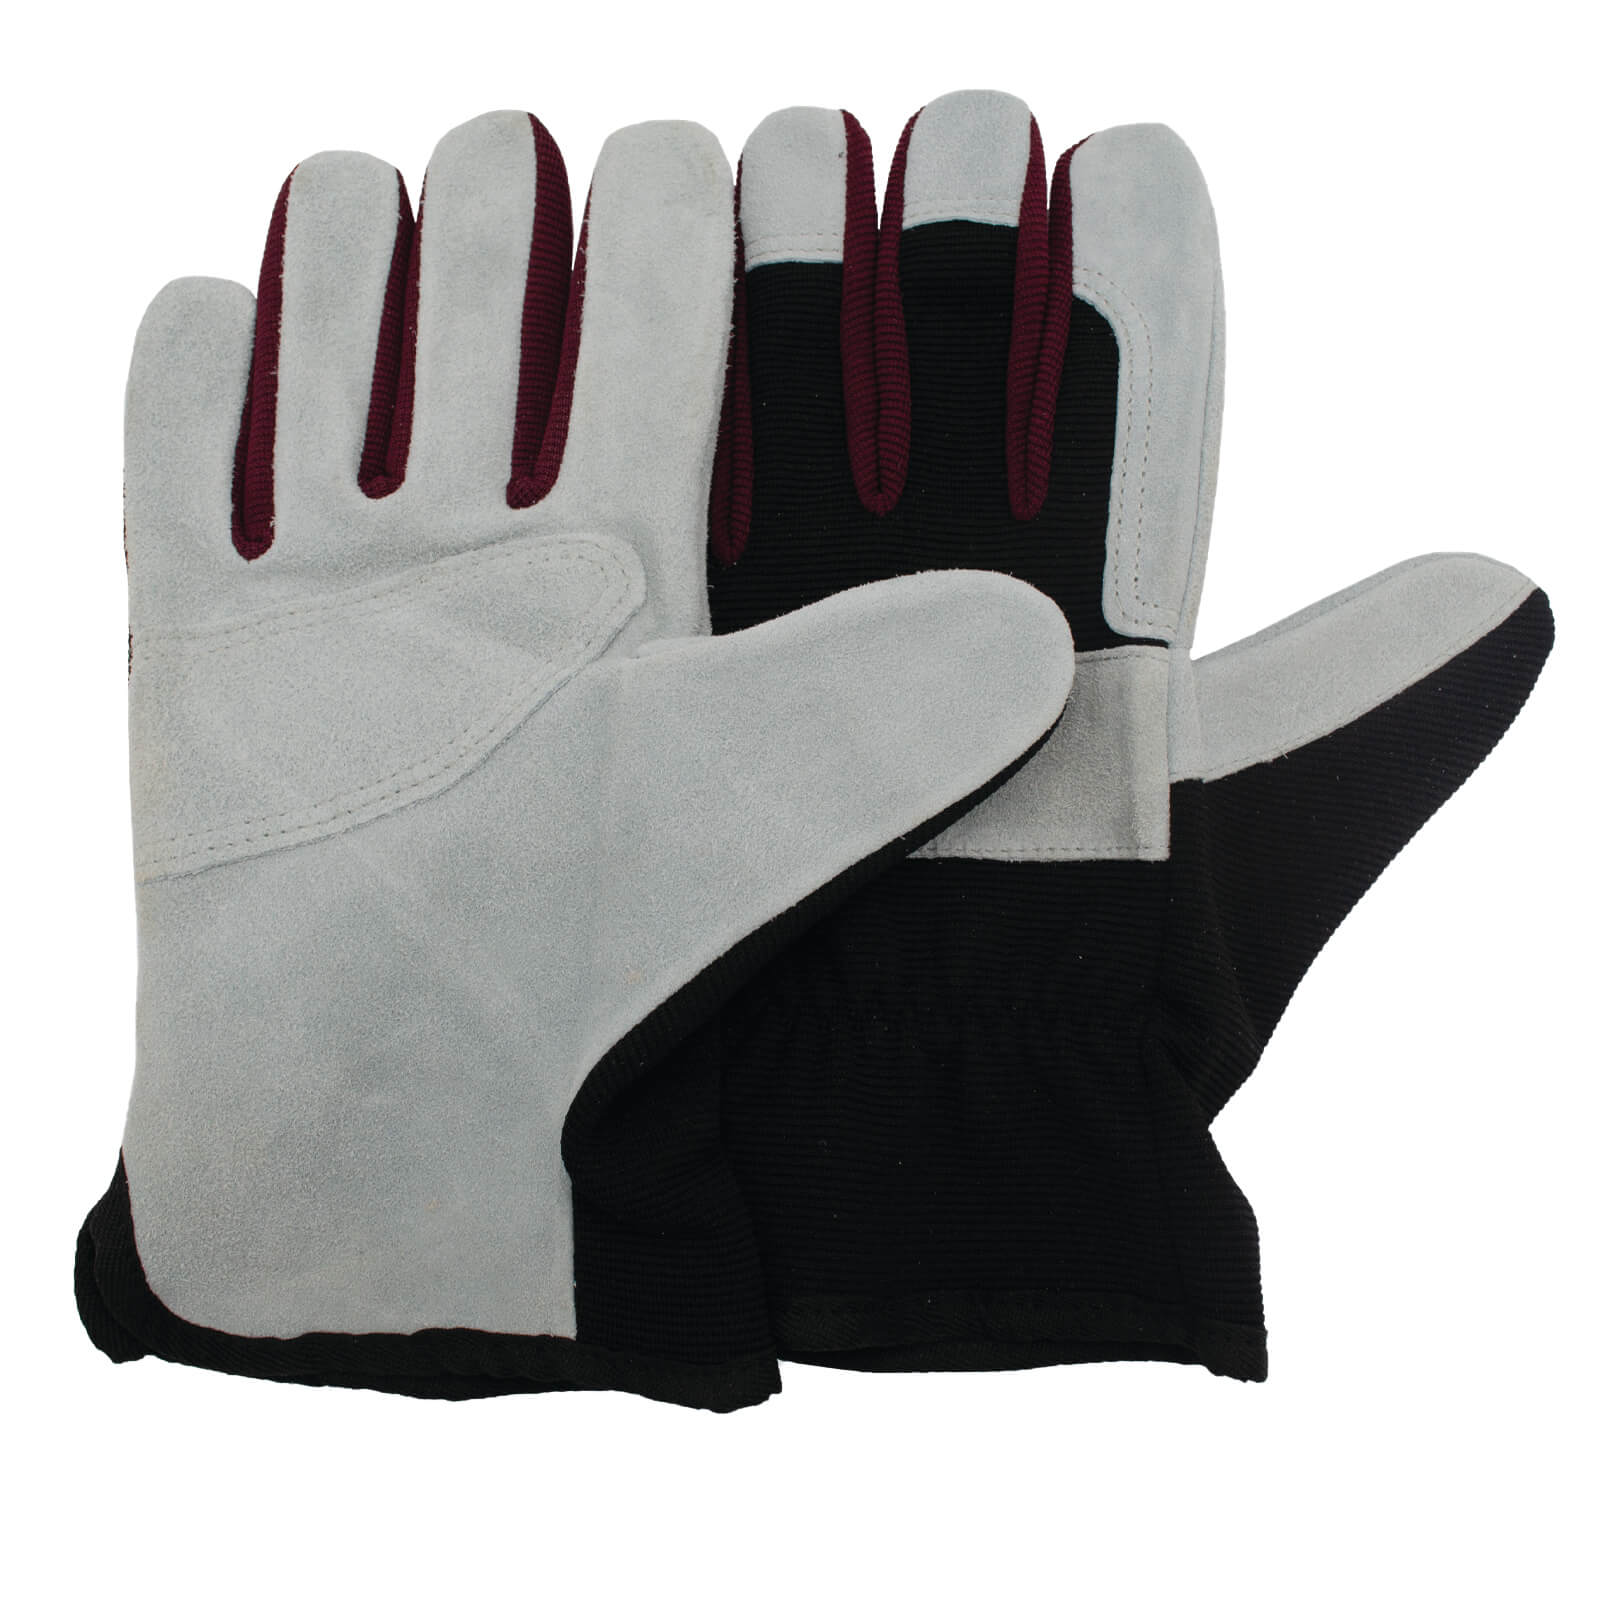 Big Mike by Stonebreaker Leather Palm Sports Gloves - Medium